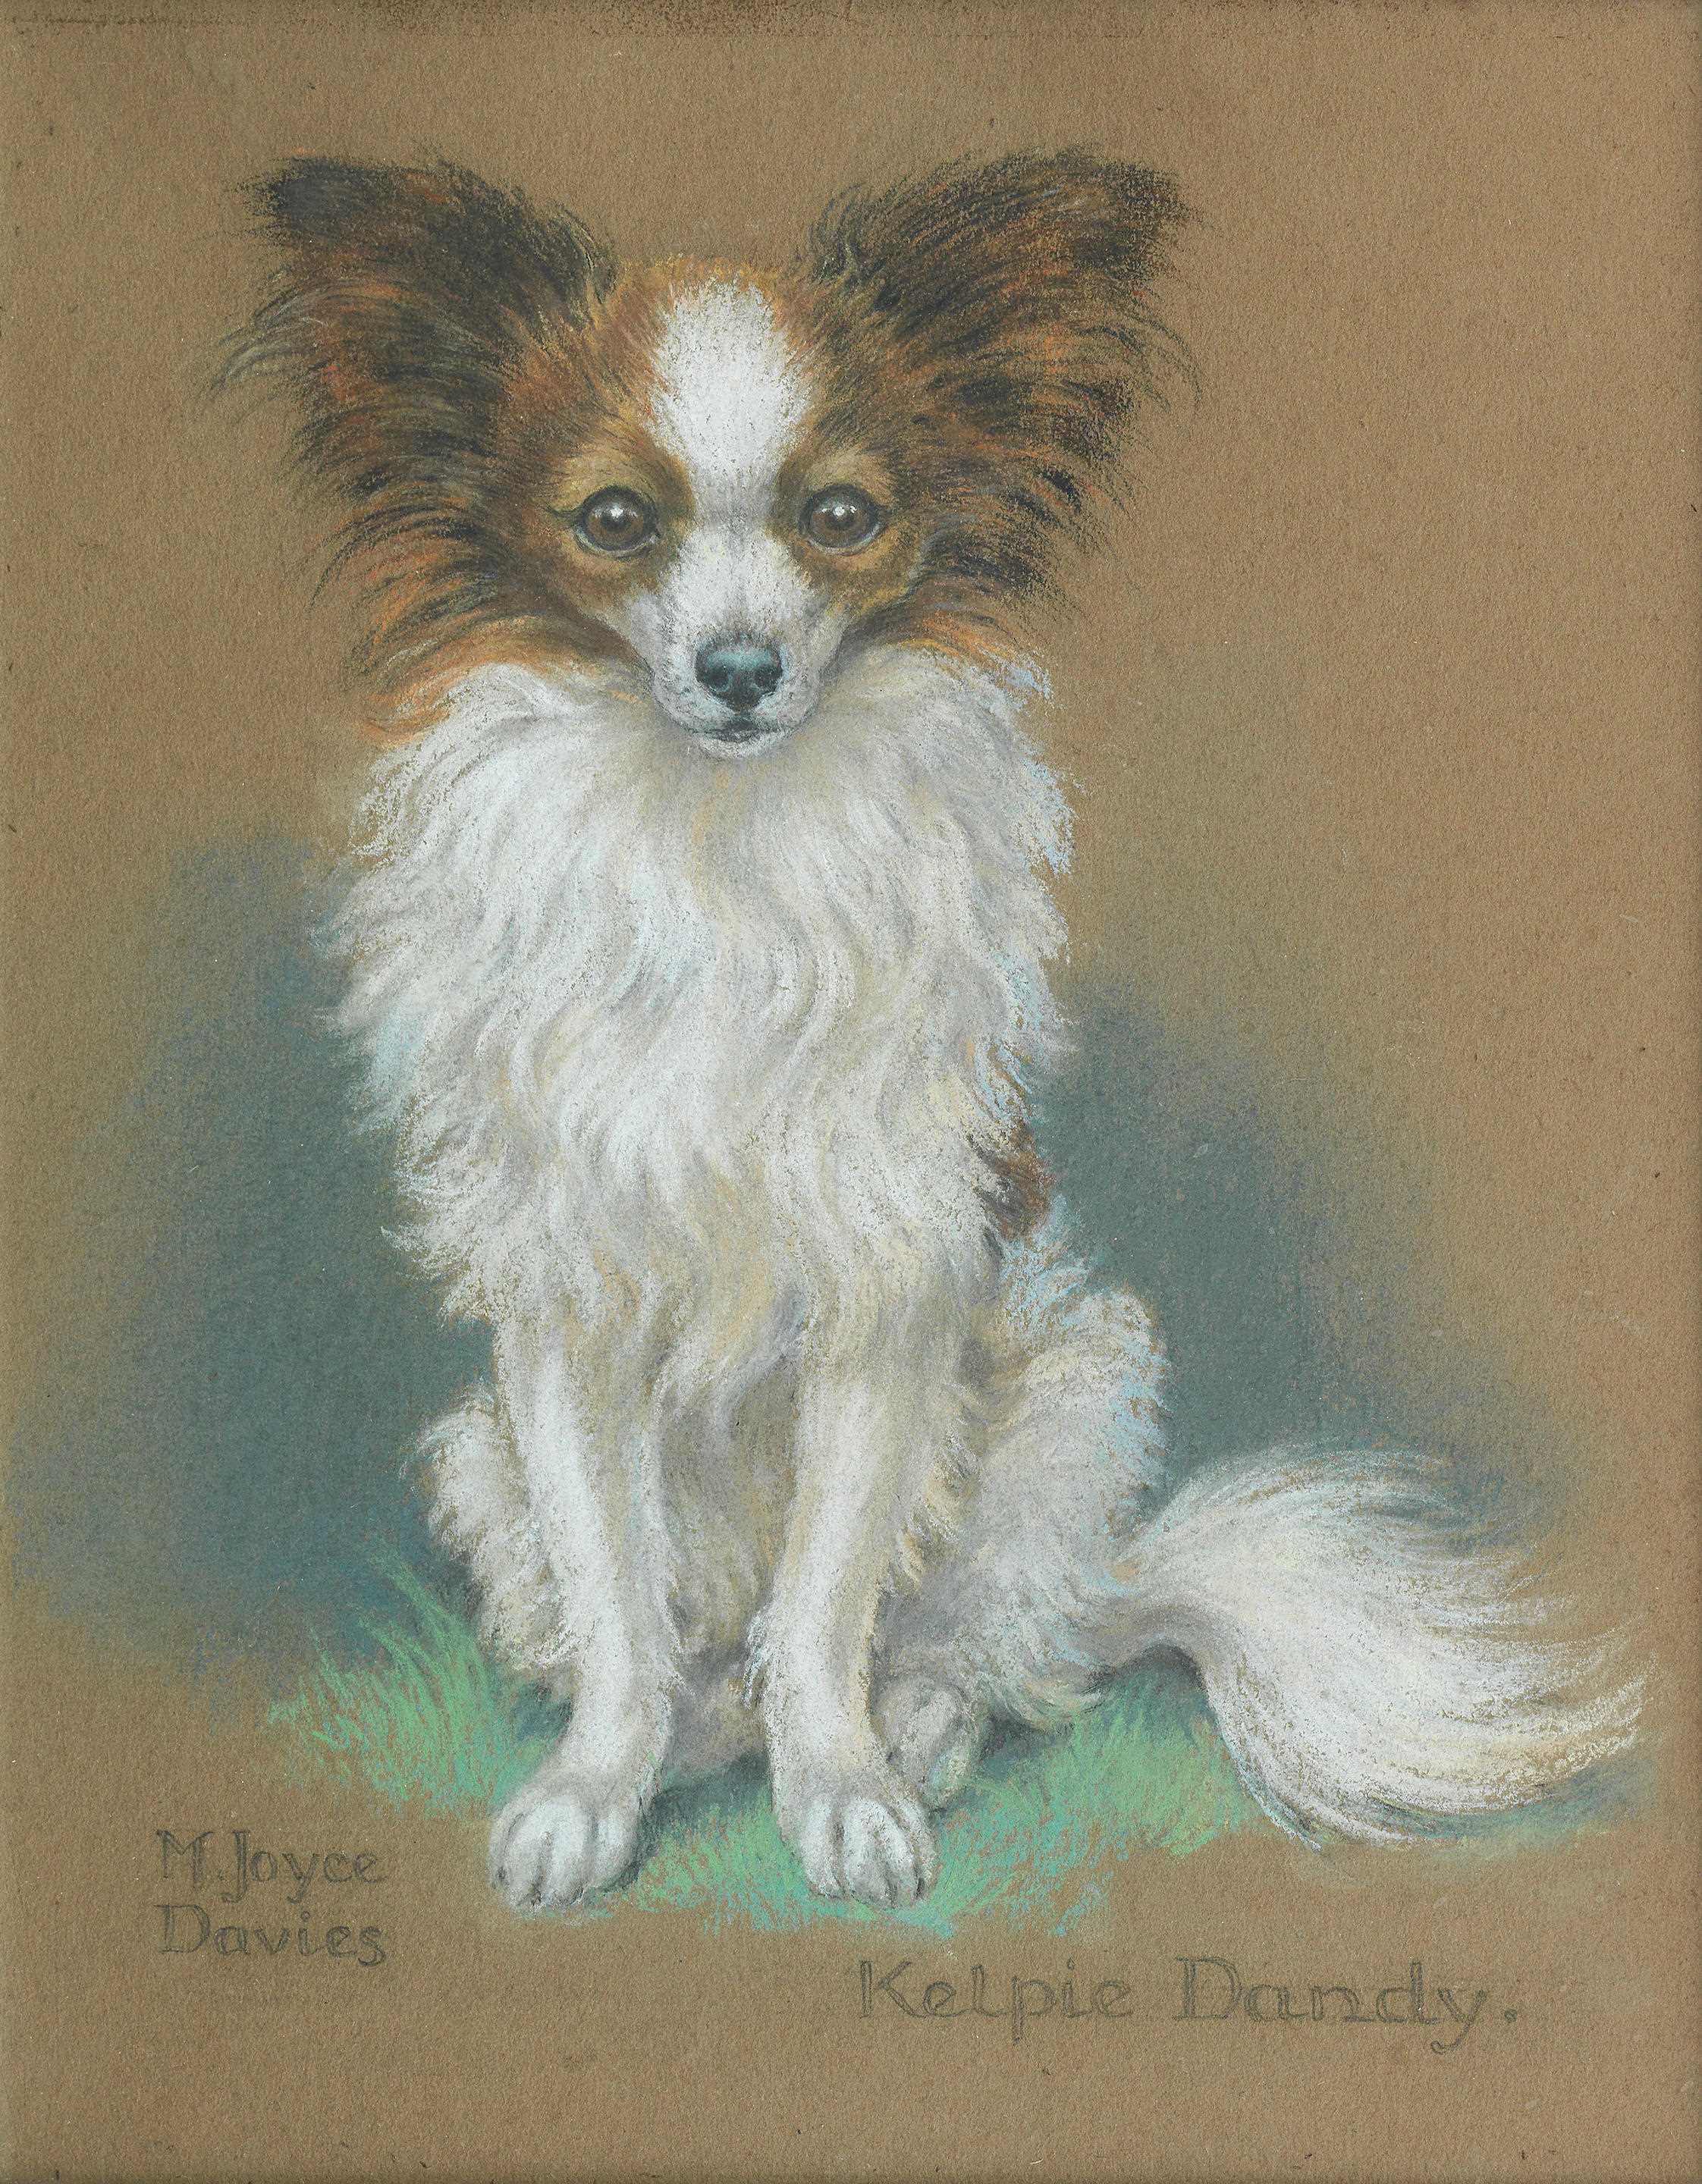 Click for larger image: Papillion pastel by M Joyce Davies (English, early to mid 20th century) - Papillion pastel by M Joyce Davies (English, early to mid 20th century)